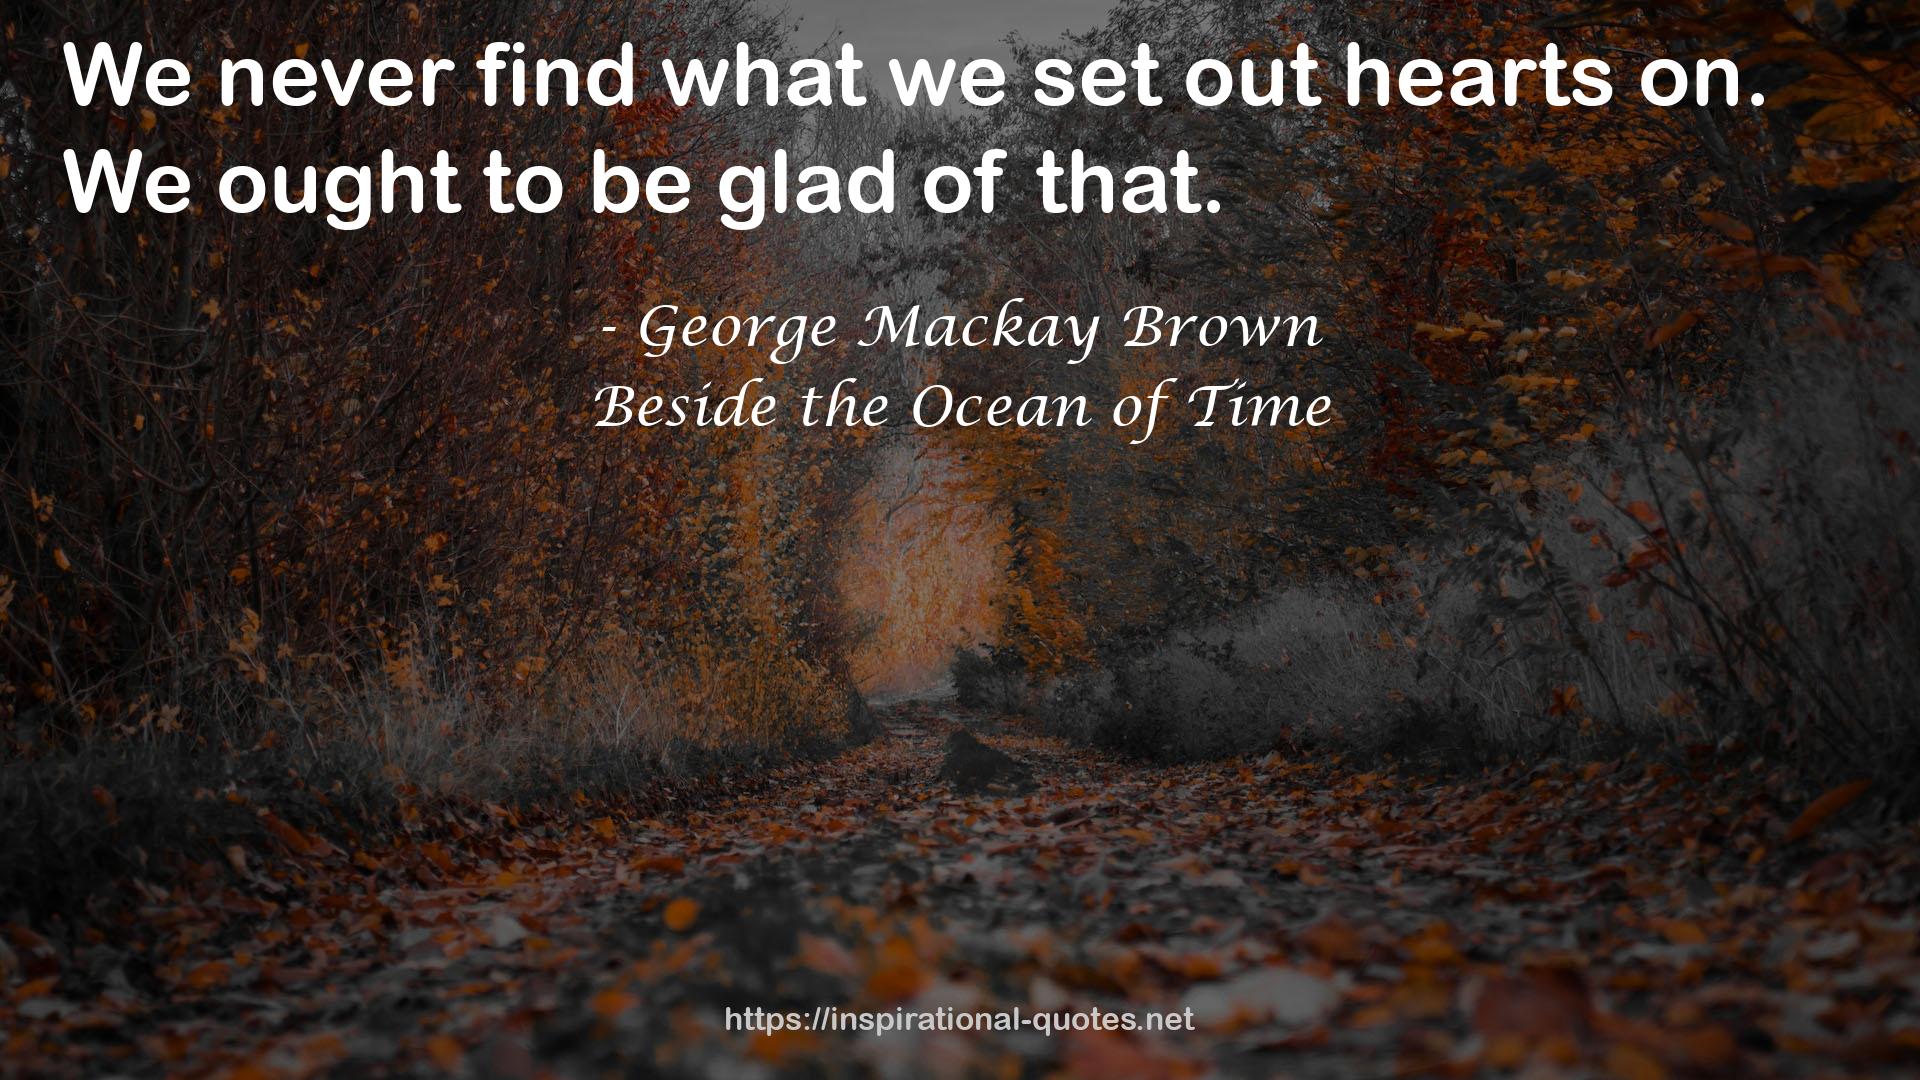 Beside the Ocean of Time QUOTES